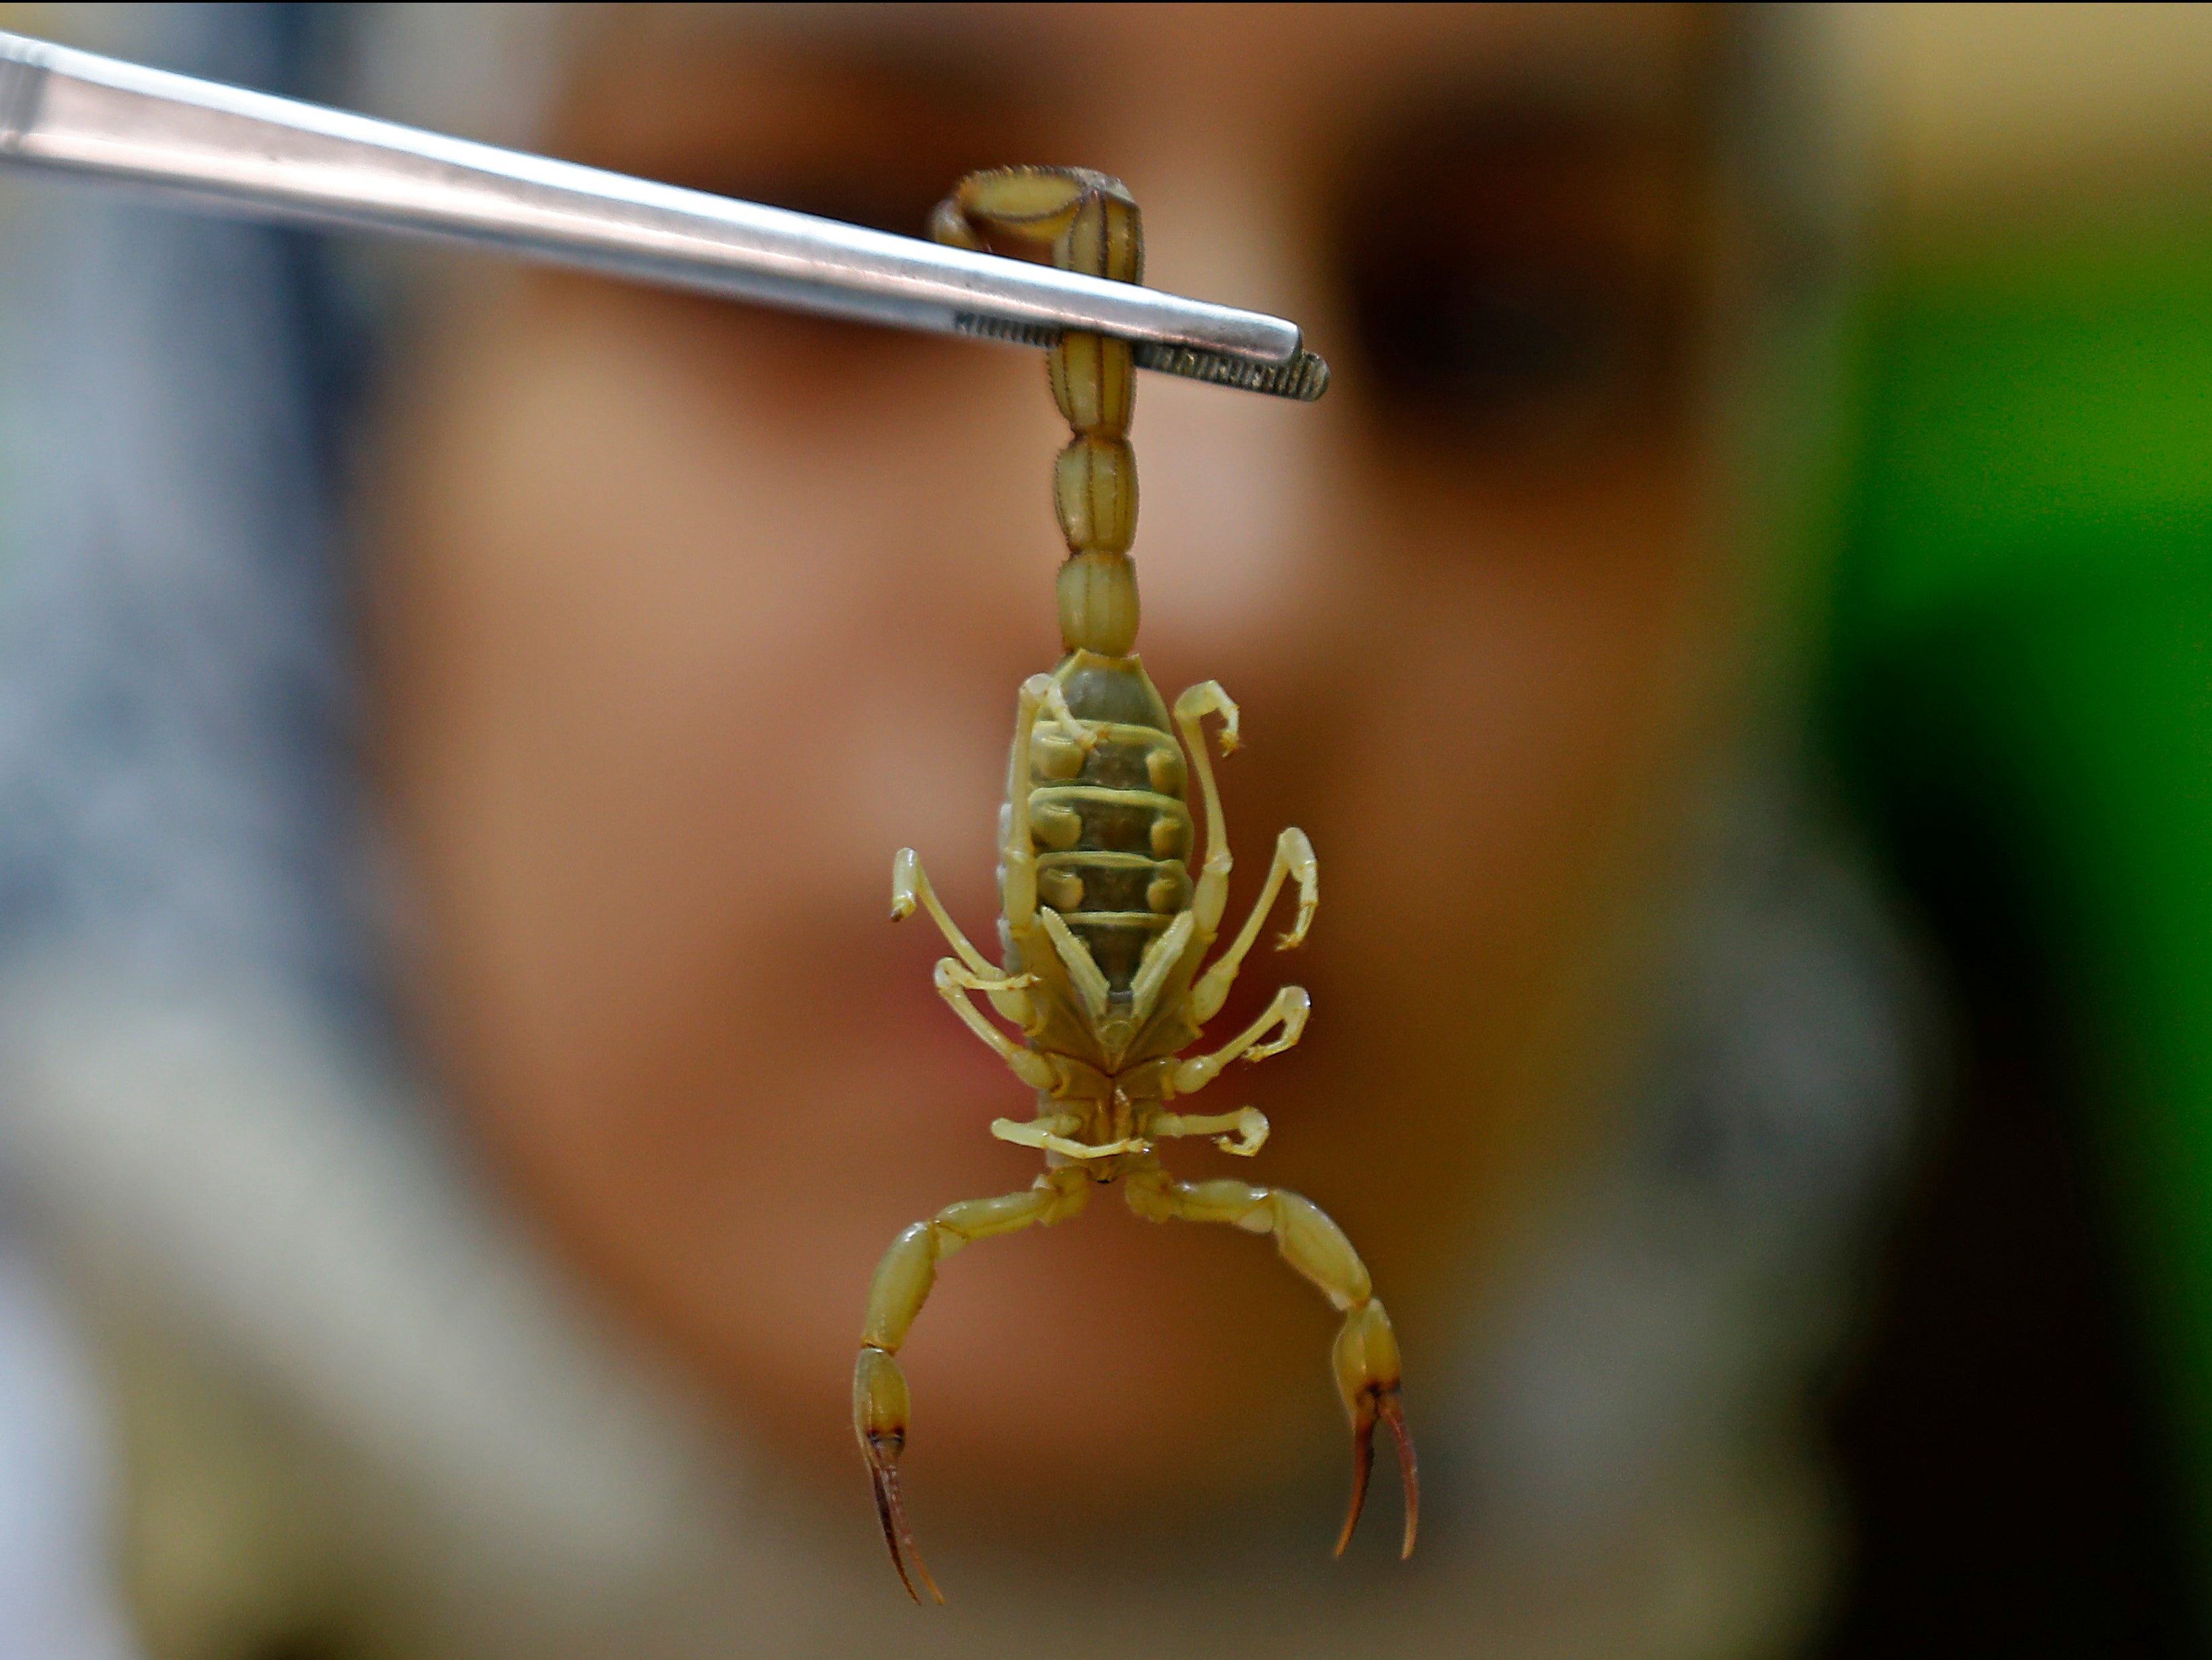 A pharmacist catches a scorpion at the Scorpion Kingdom laboratory and farm in Egypt, where scientists are studying the pharmaceutical properties of venom